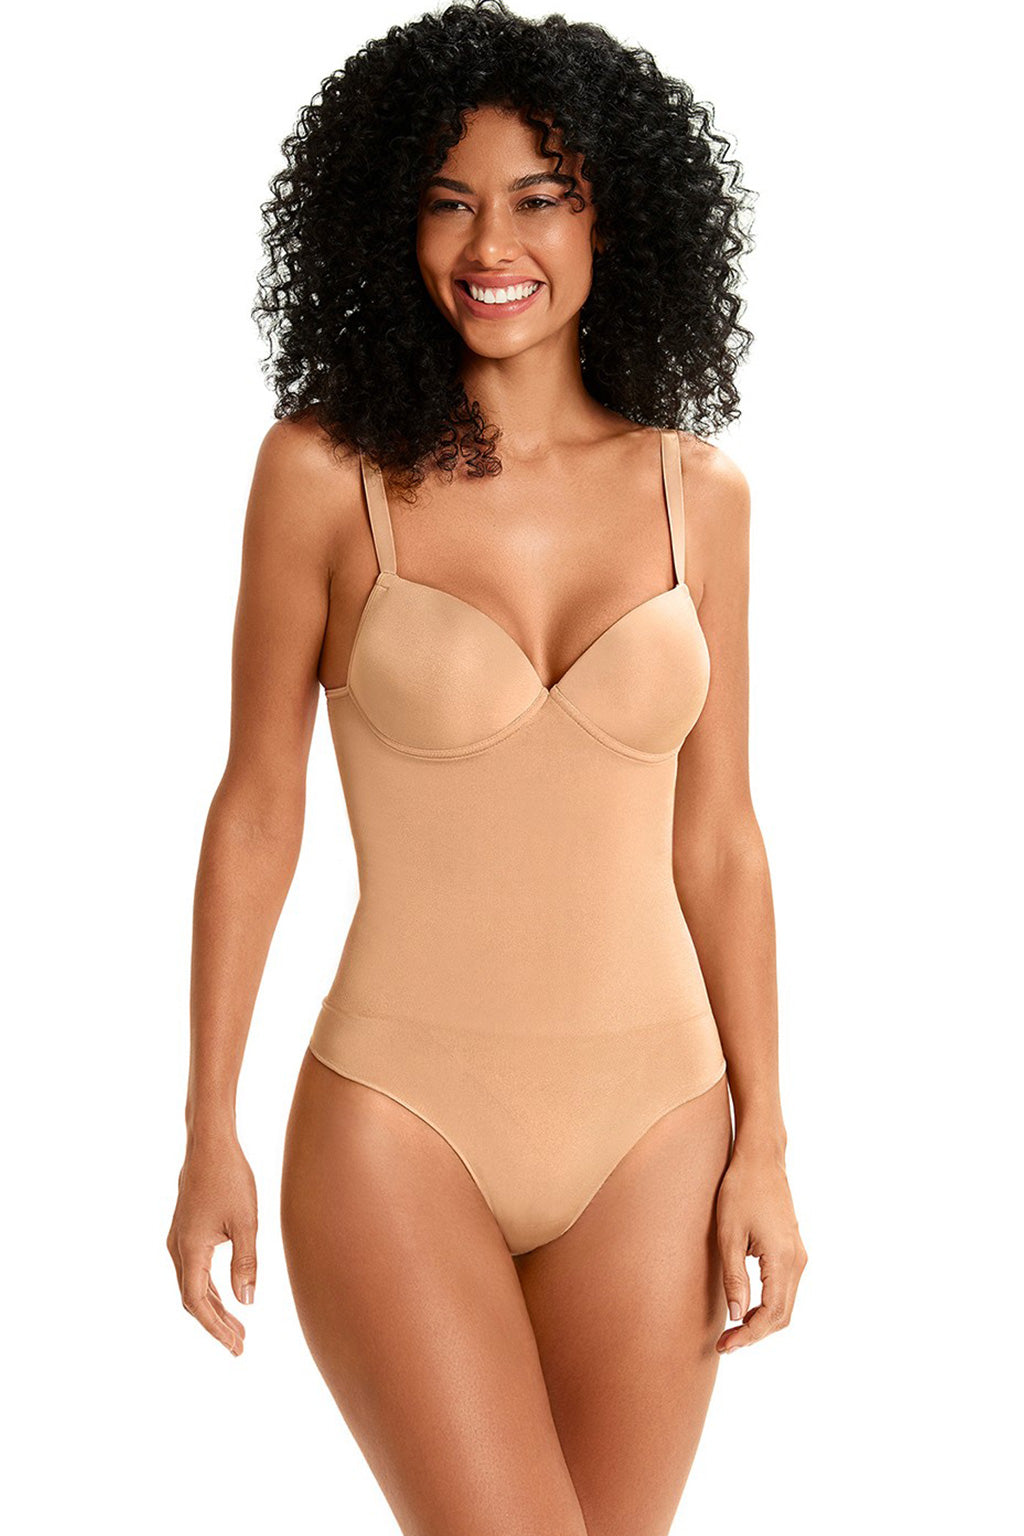 Backless Lace Bodysuit Foundation With Underwired Soft Cups Made